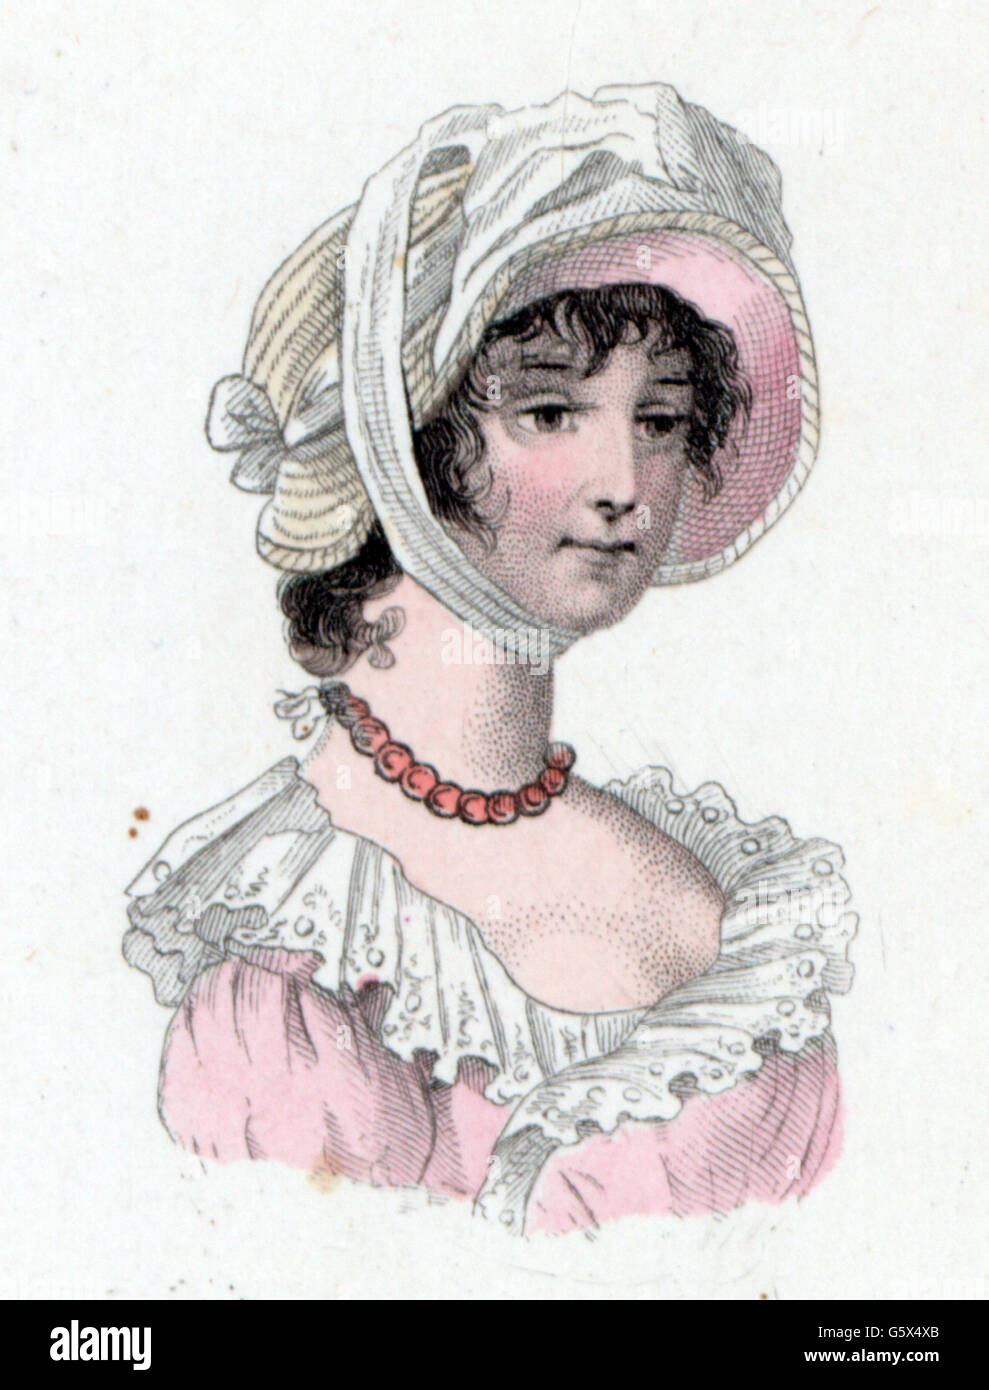 fashion, 19th century, woman with summer hat, 1804,  Additional-Rights-Clearences-Not Available Stock Photo - Alamy